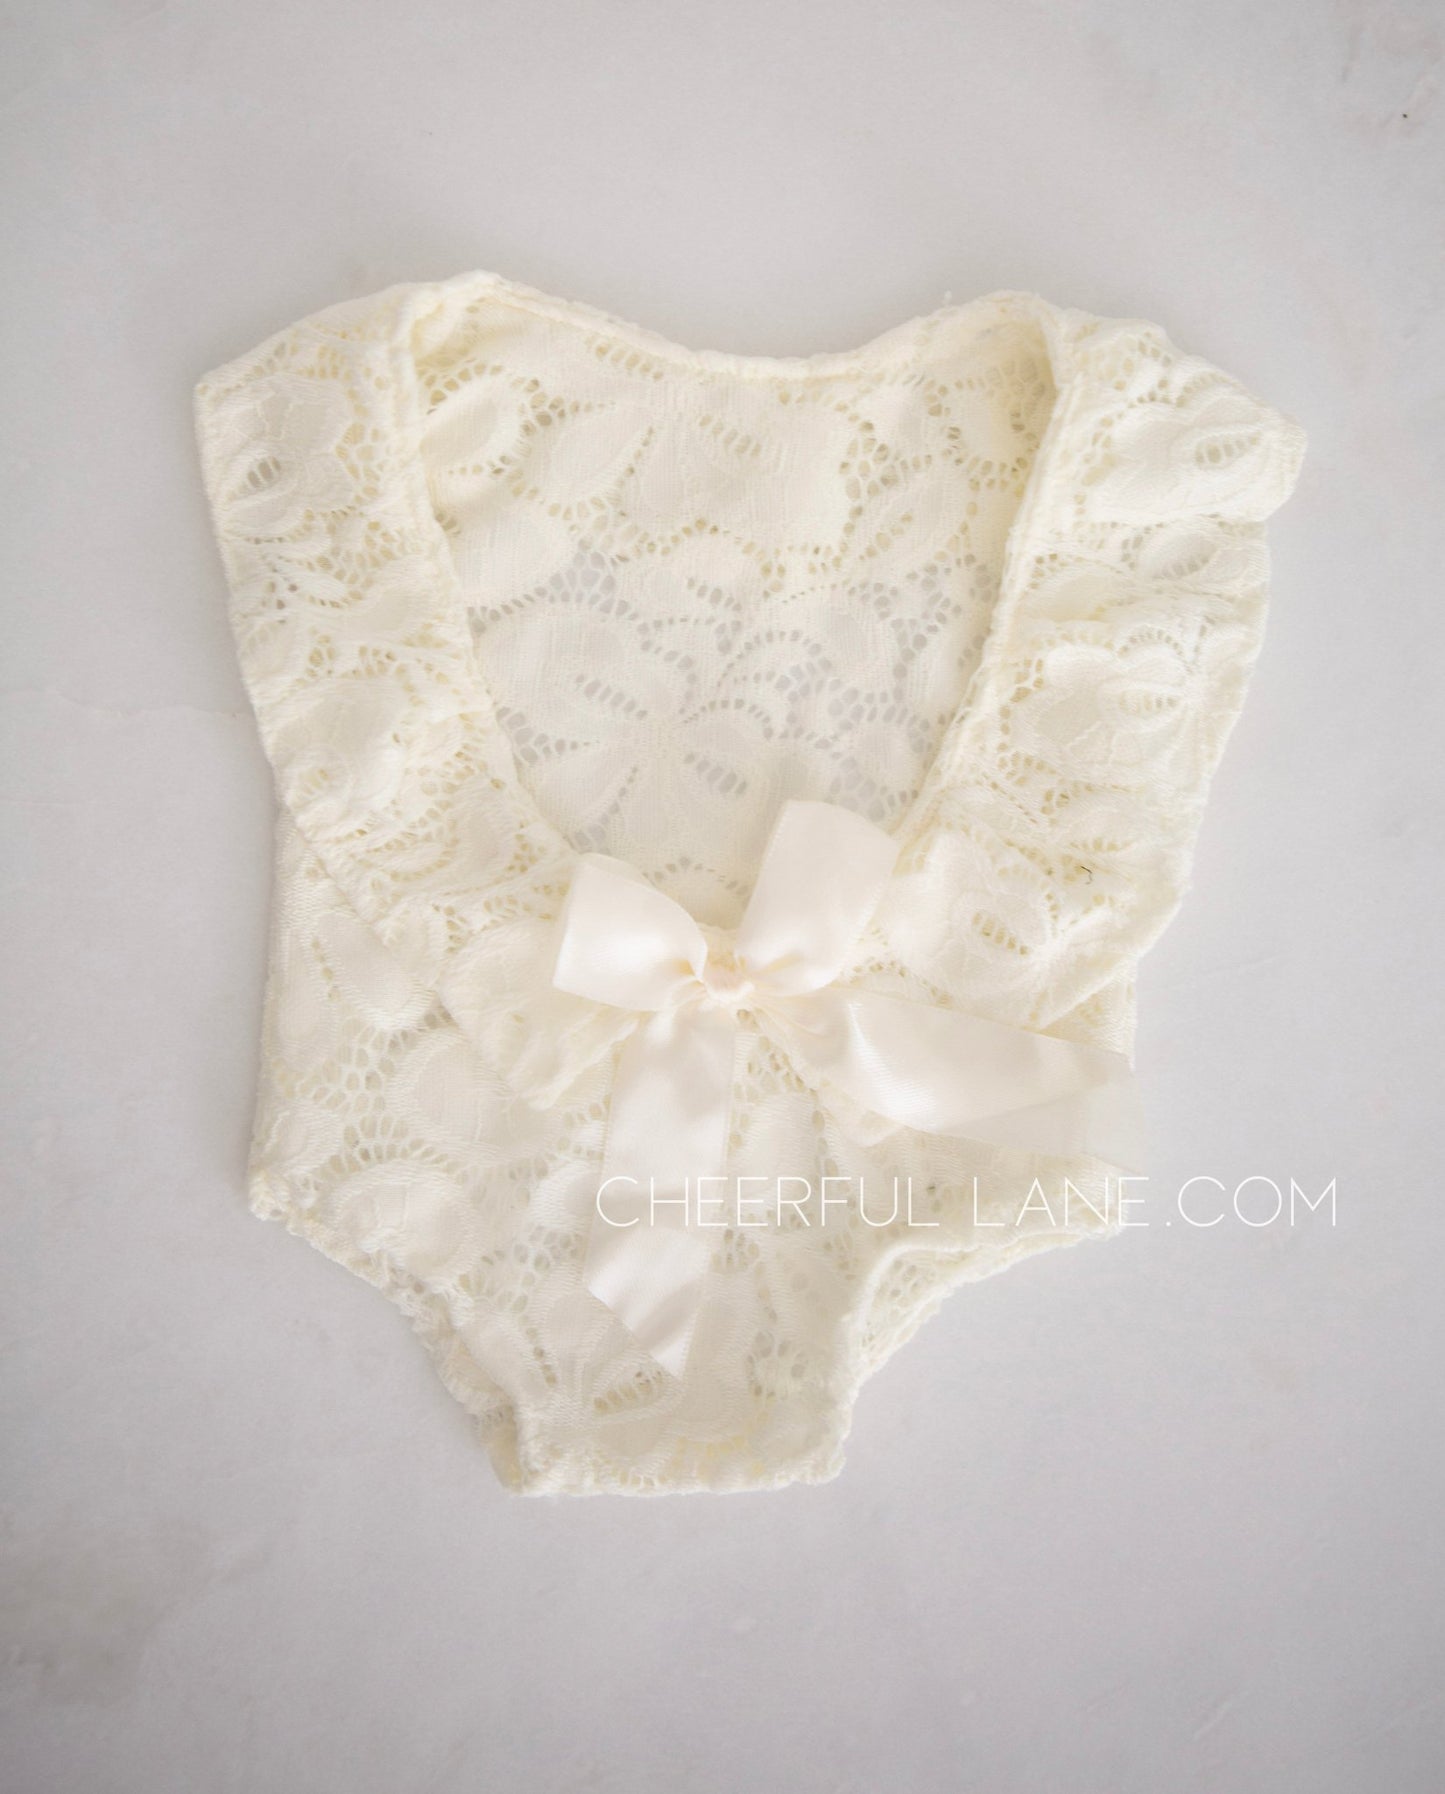 Cream Lace Newborn Romper Photo Prop - Open Back with Bow - Cheerful Lane